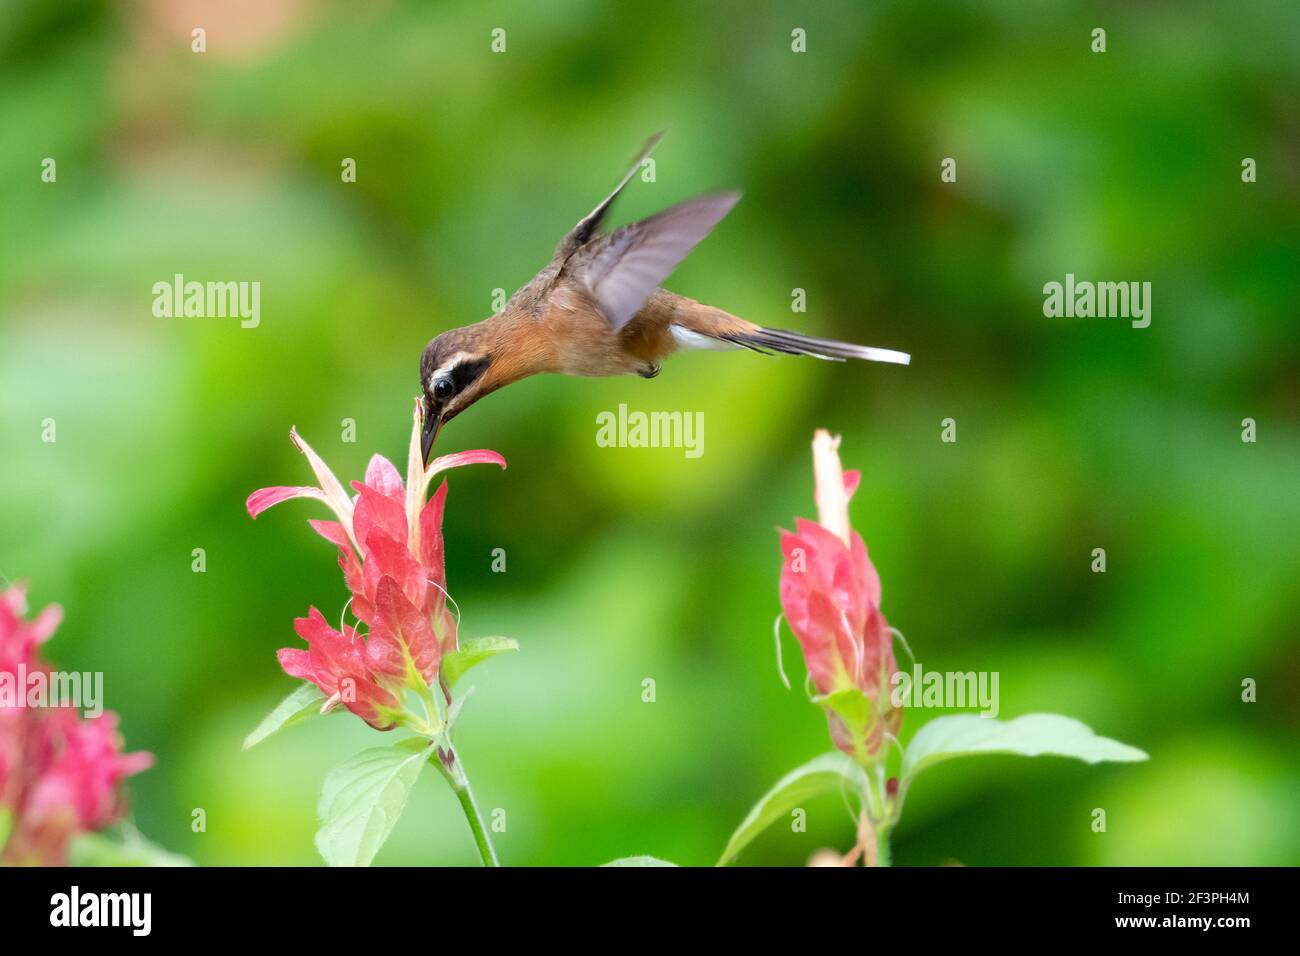 A Little Hermit hummingbird feeding on a Shrimp Plant with a green background. Wildlife in nature. Bird in flight. Stock Photo